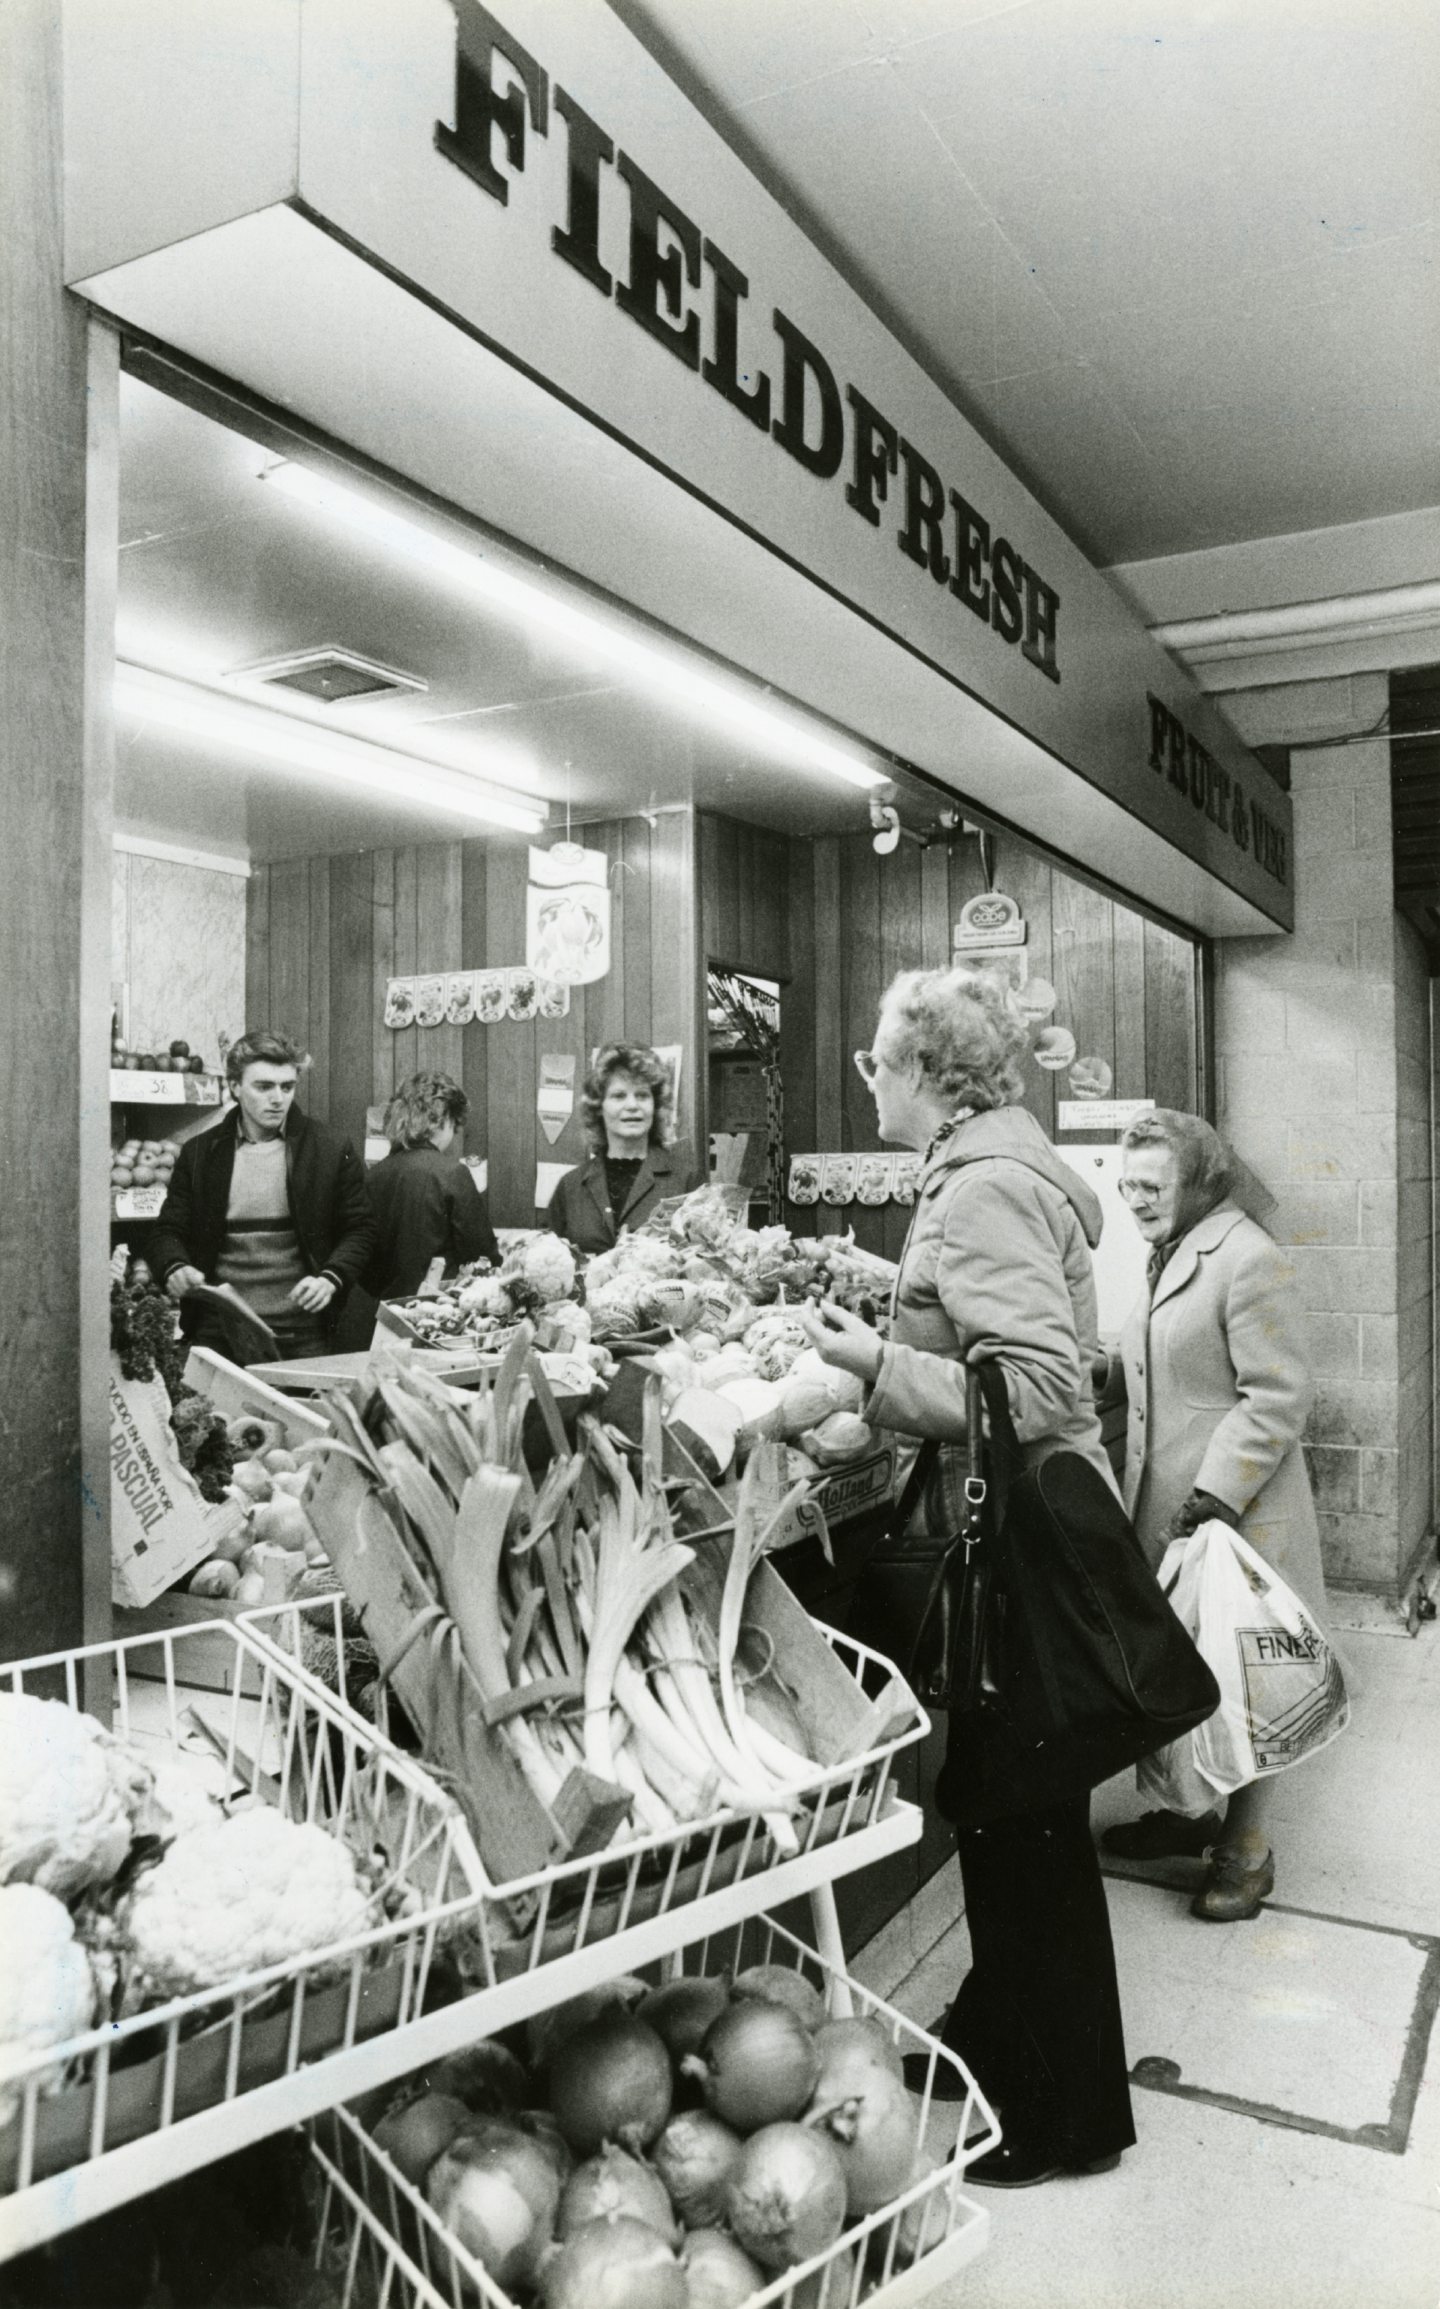 Aberdeen Market was always the place to go to find a bargain through the decades.